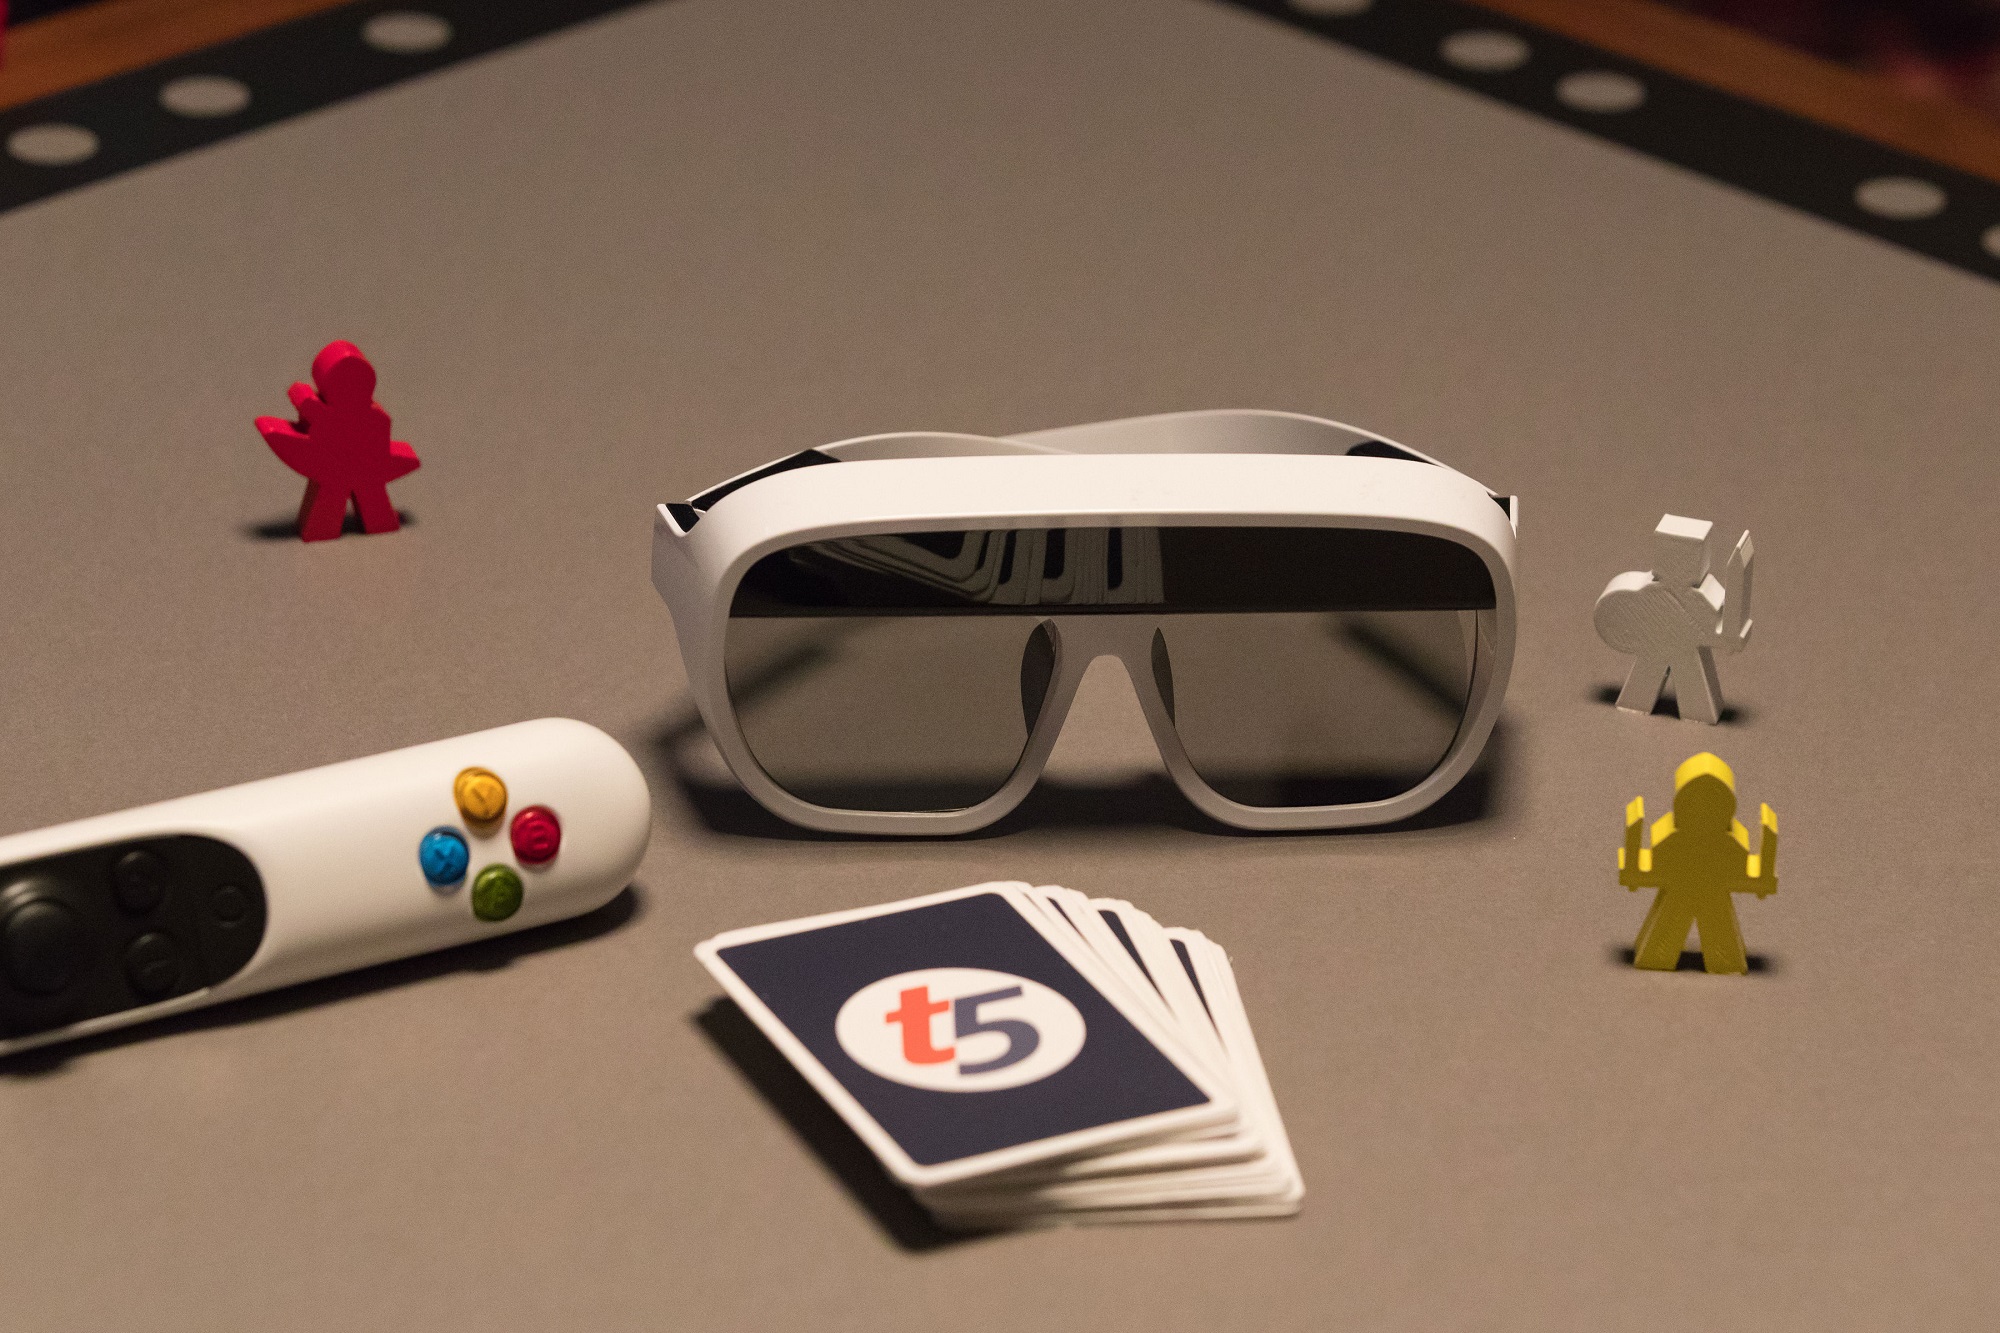 tilt five product image glasses and controller